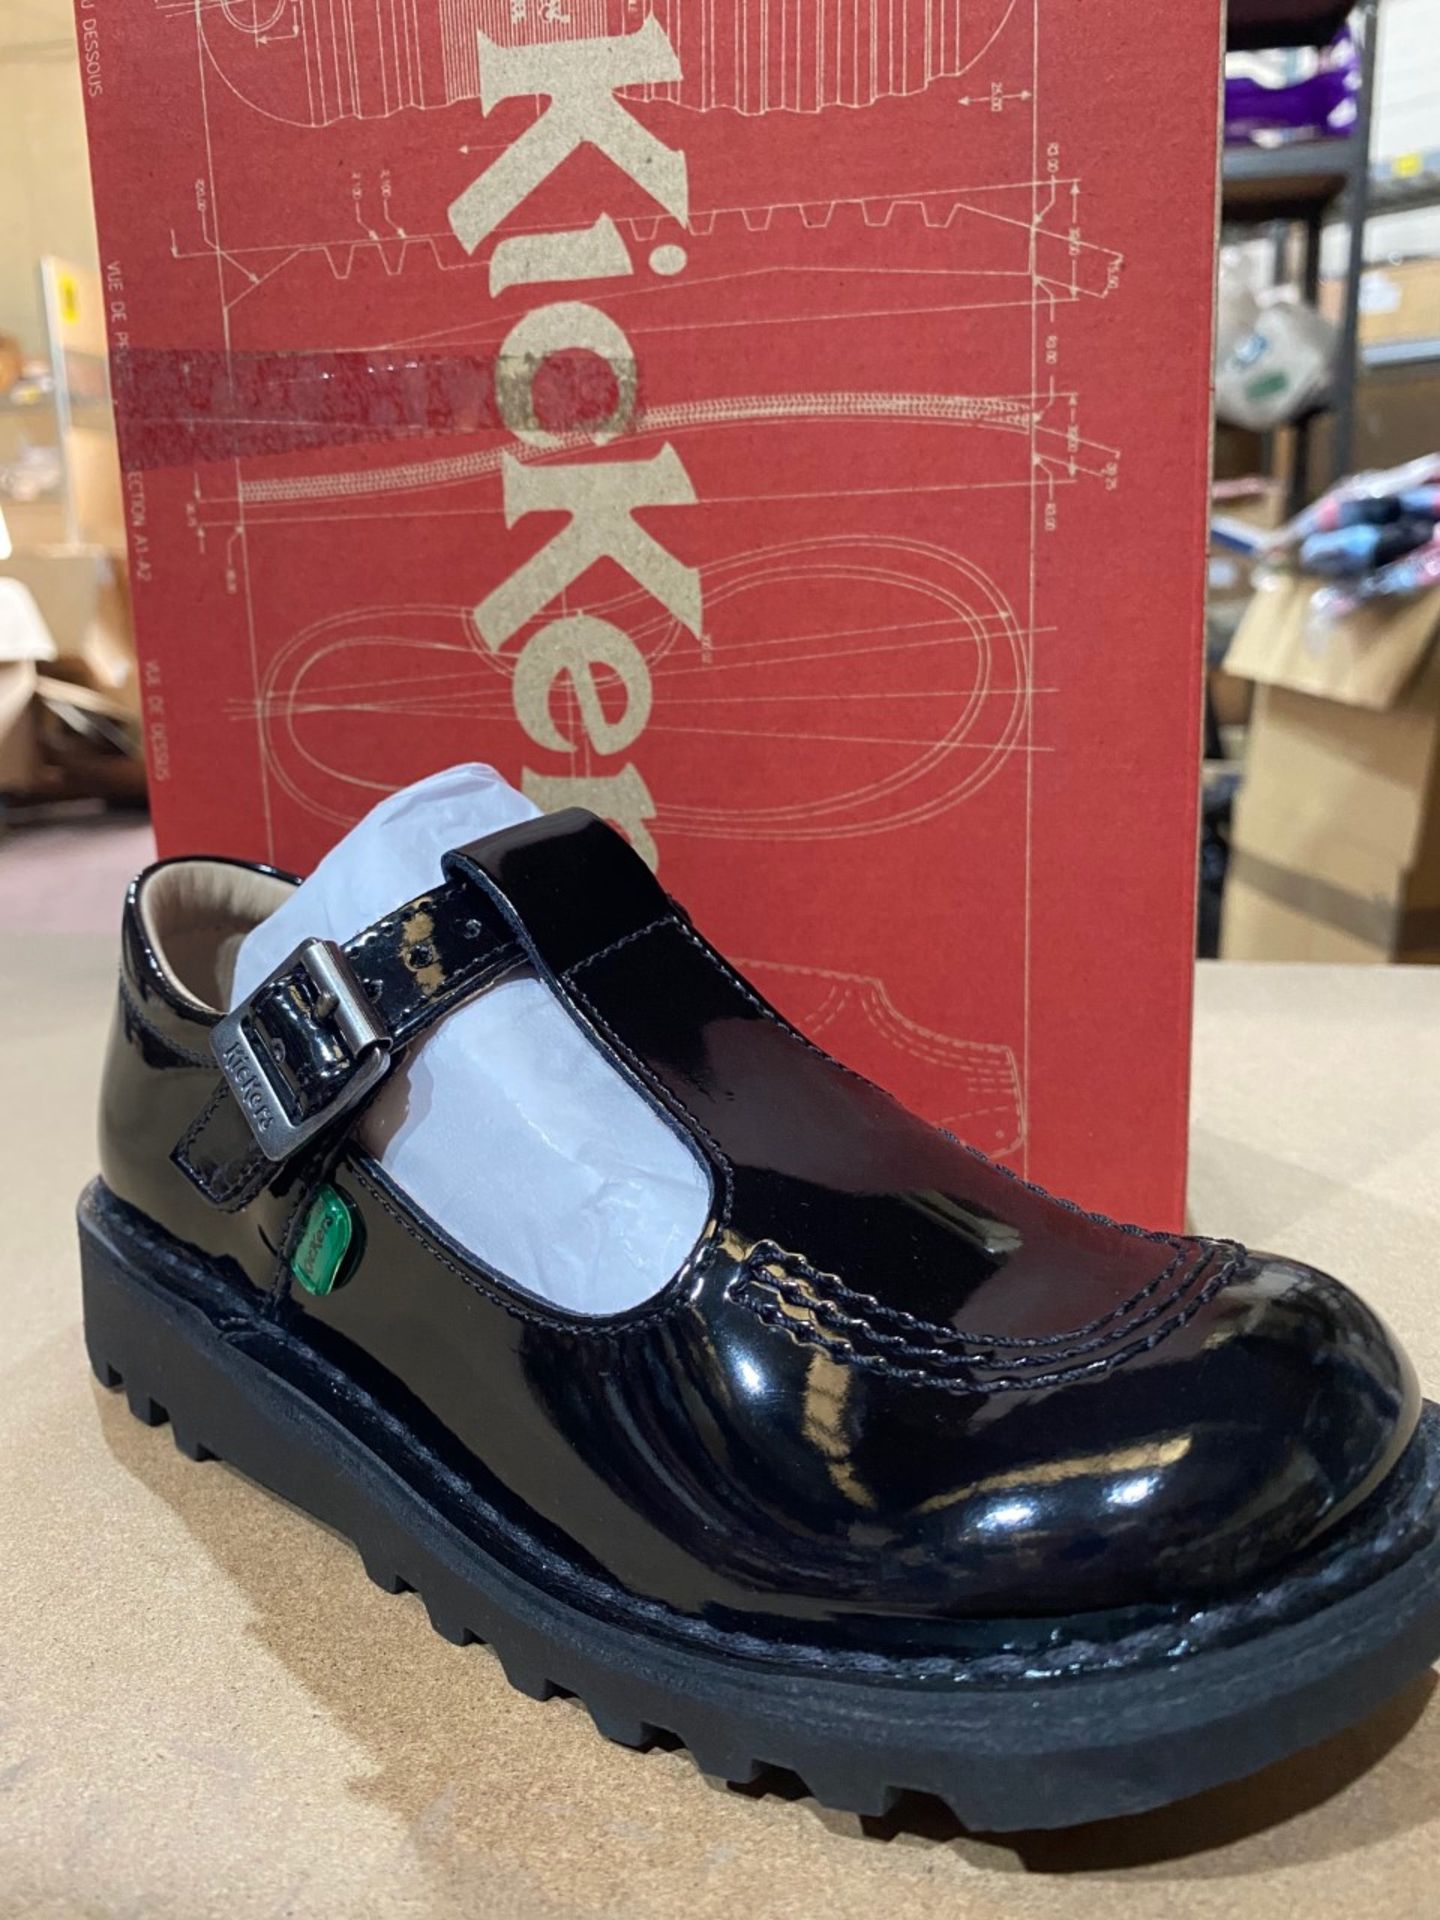 (NO VAT) 2 X NEW BOXED PAIRS OF KICKERS SHOES SIZE UK INFANT 13